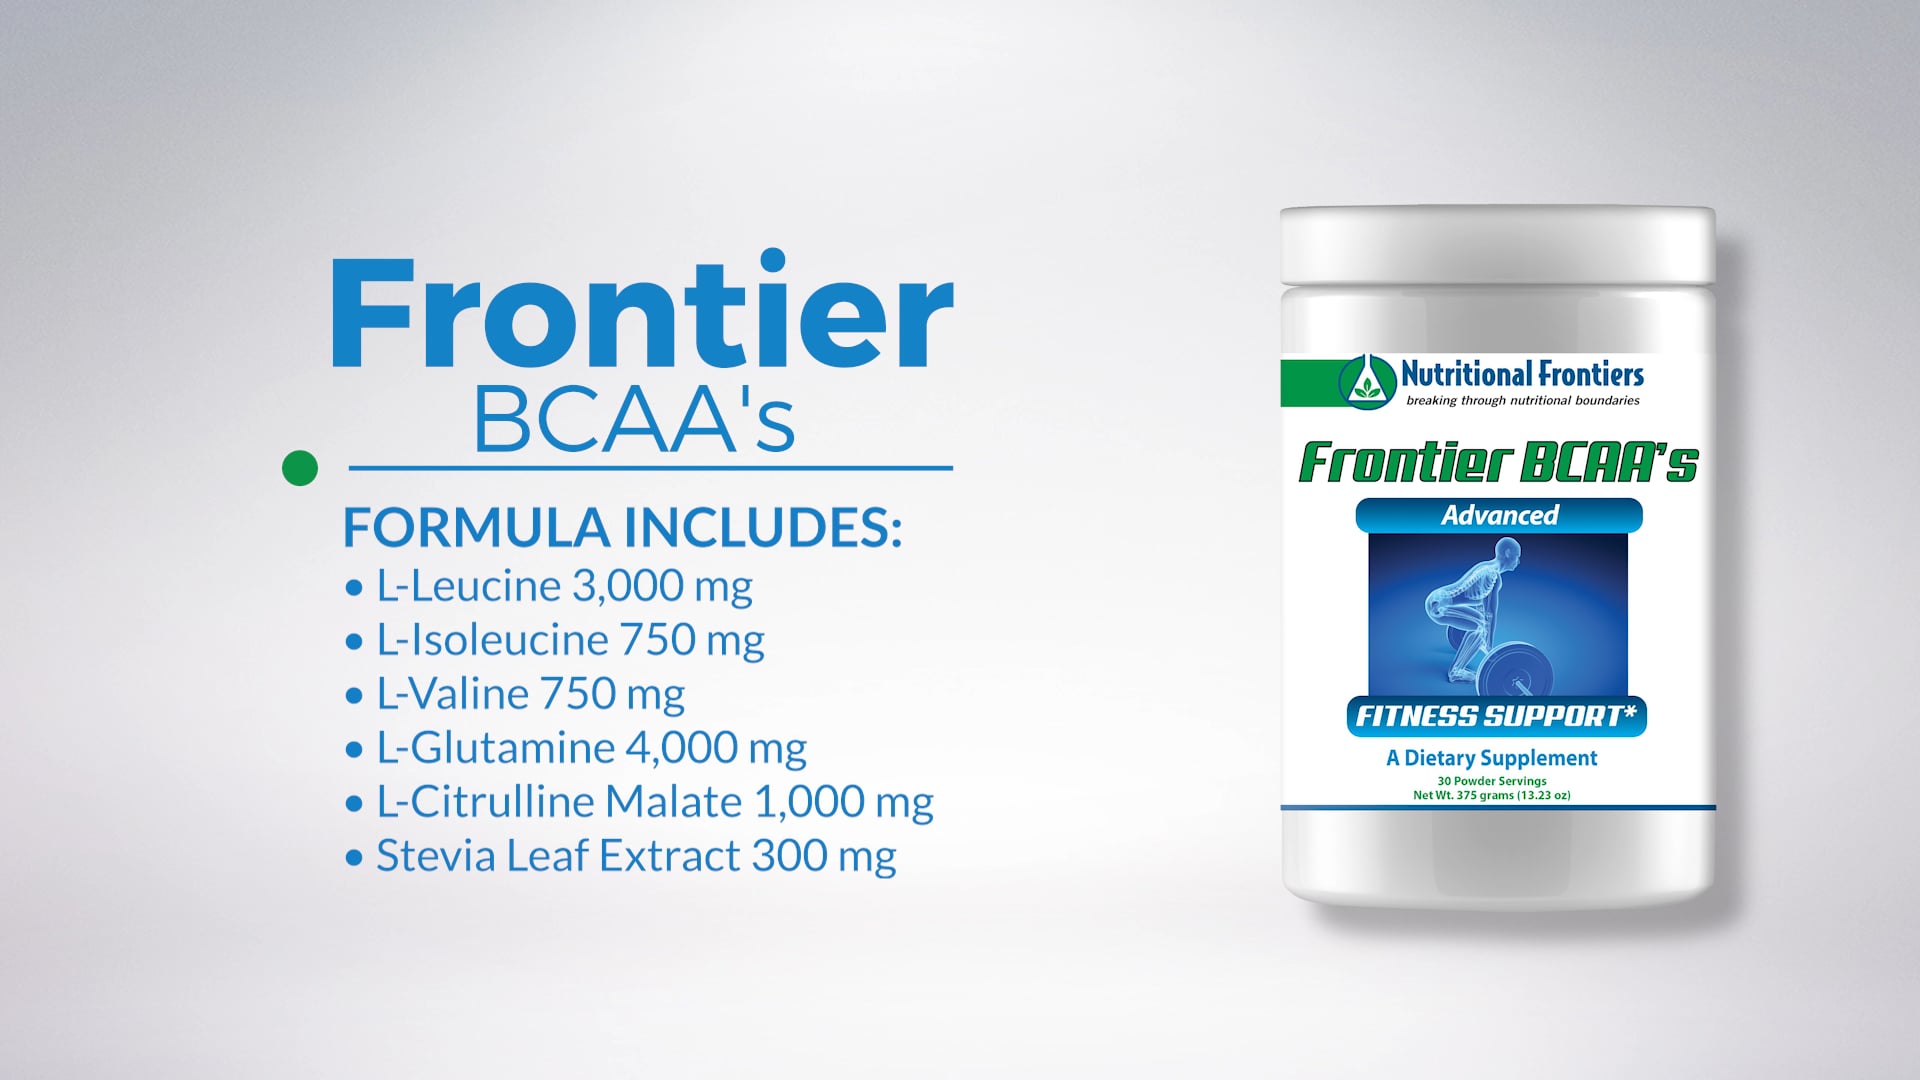 NF Product Overview - Frontier BCAA's